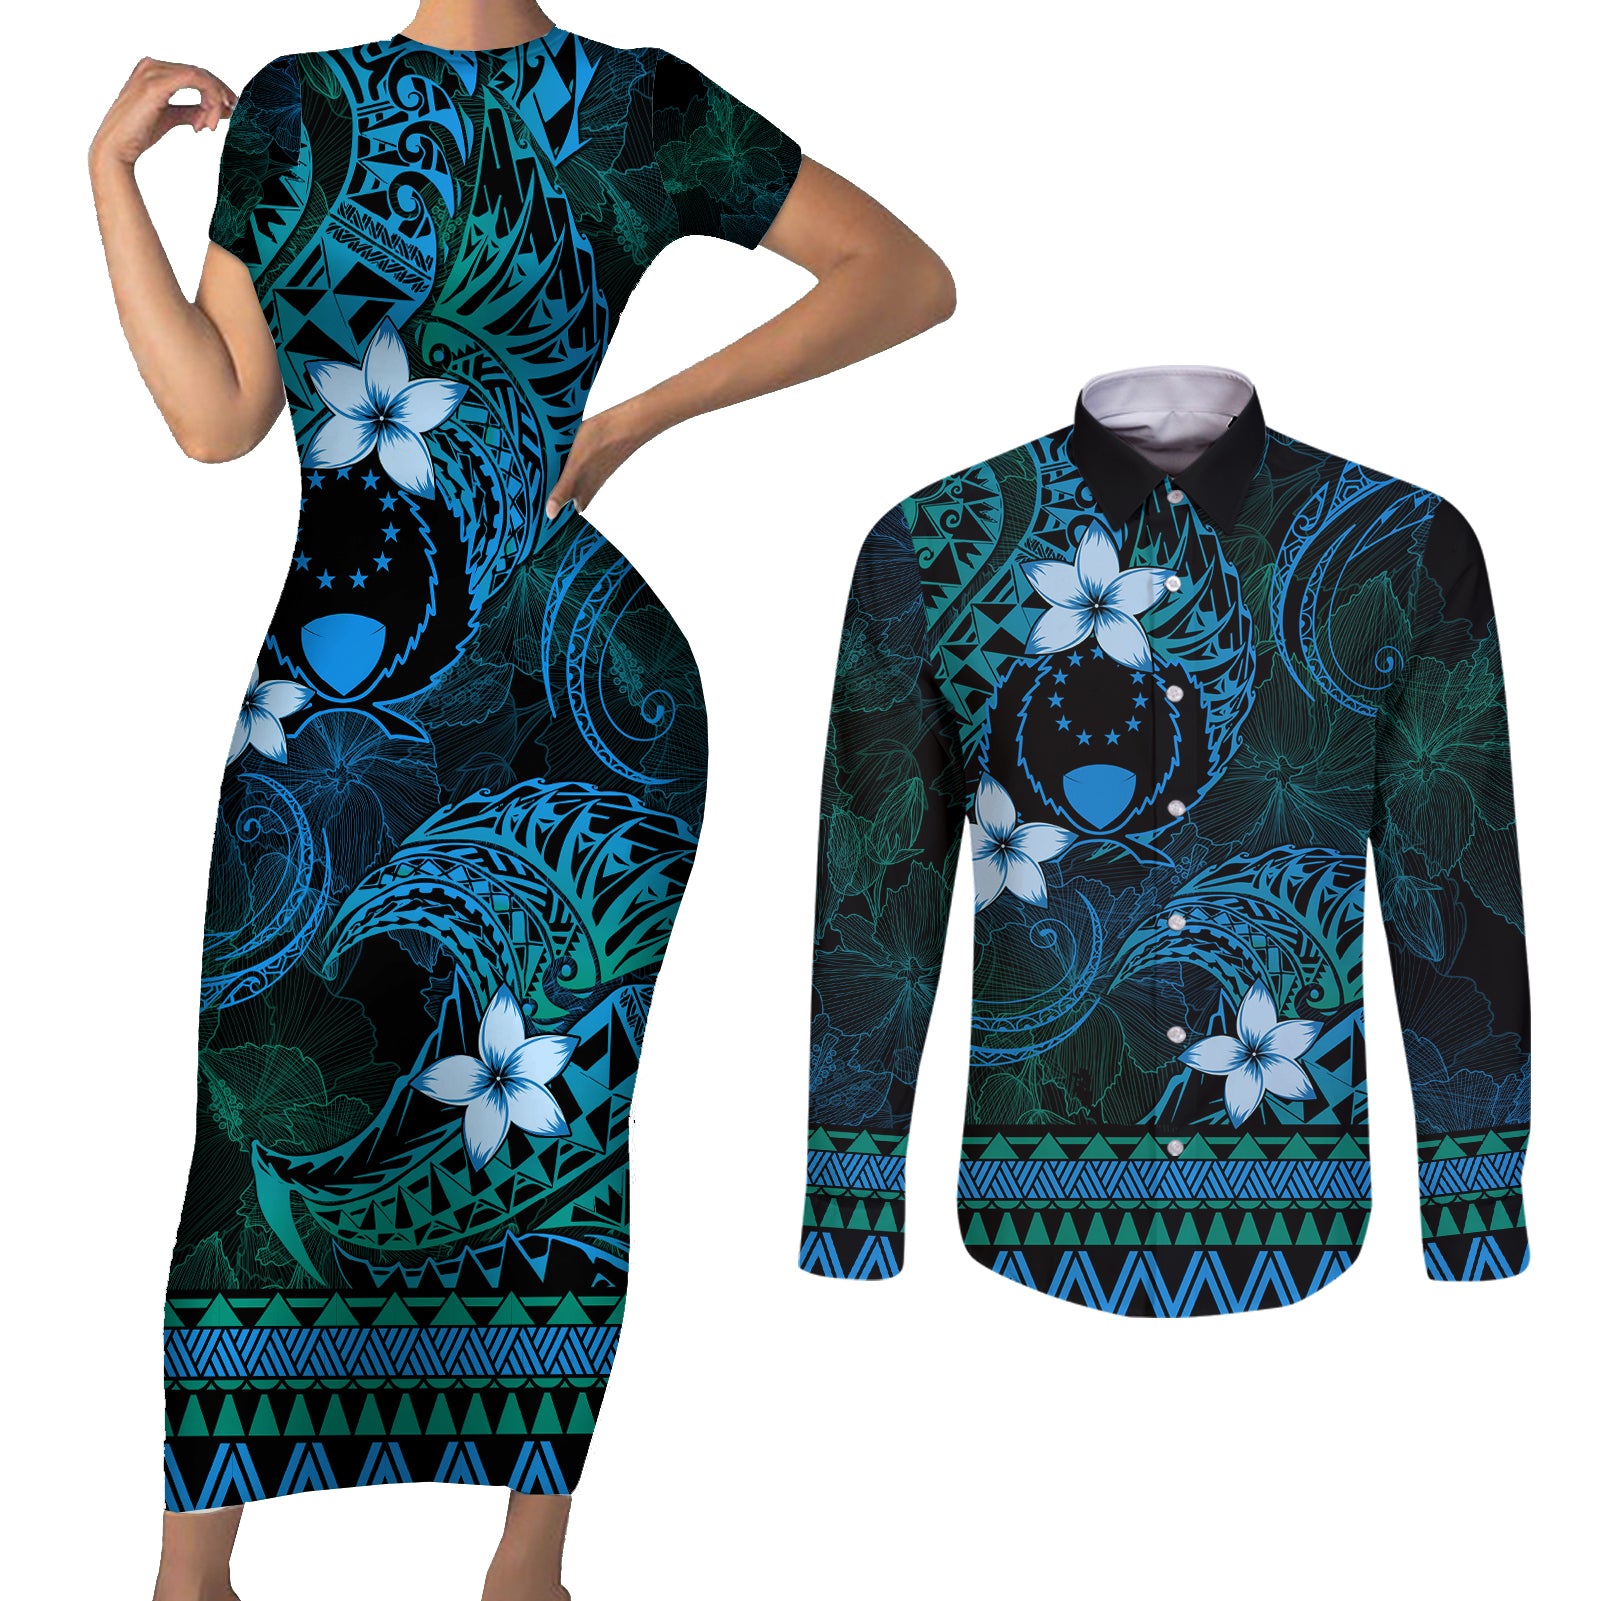 FSM Pohnpei State Couples Matching Short Sleeve Bodycon Dress and Long Sleeve Button Shirt Tribal Pattern Ocean Version LT01 Blue - Polynesian Pride